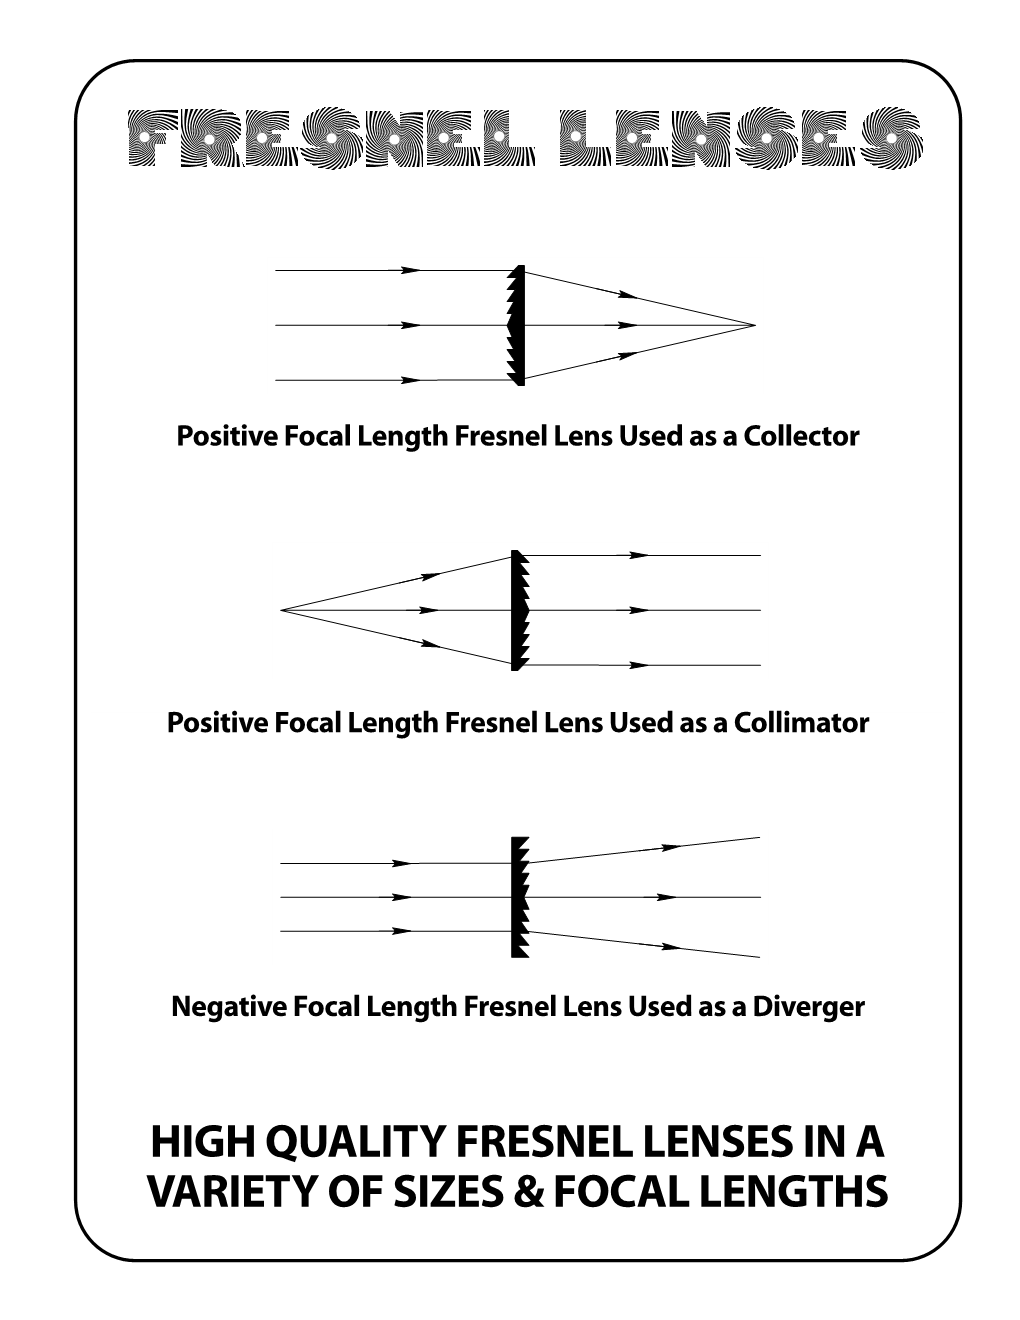 High Quality Fresnel Lenses in a Variety of Sizes & Focal Lengths